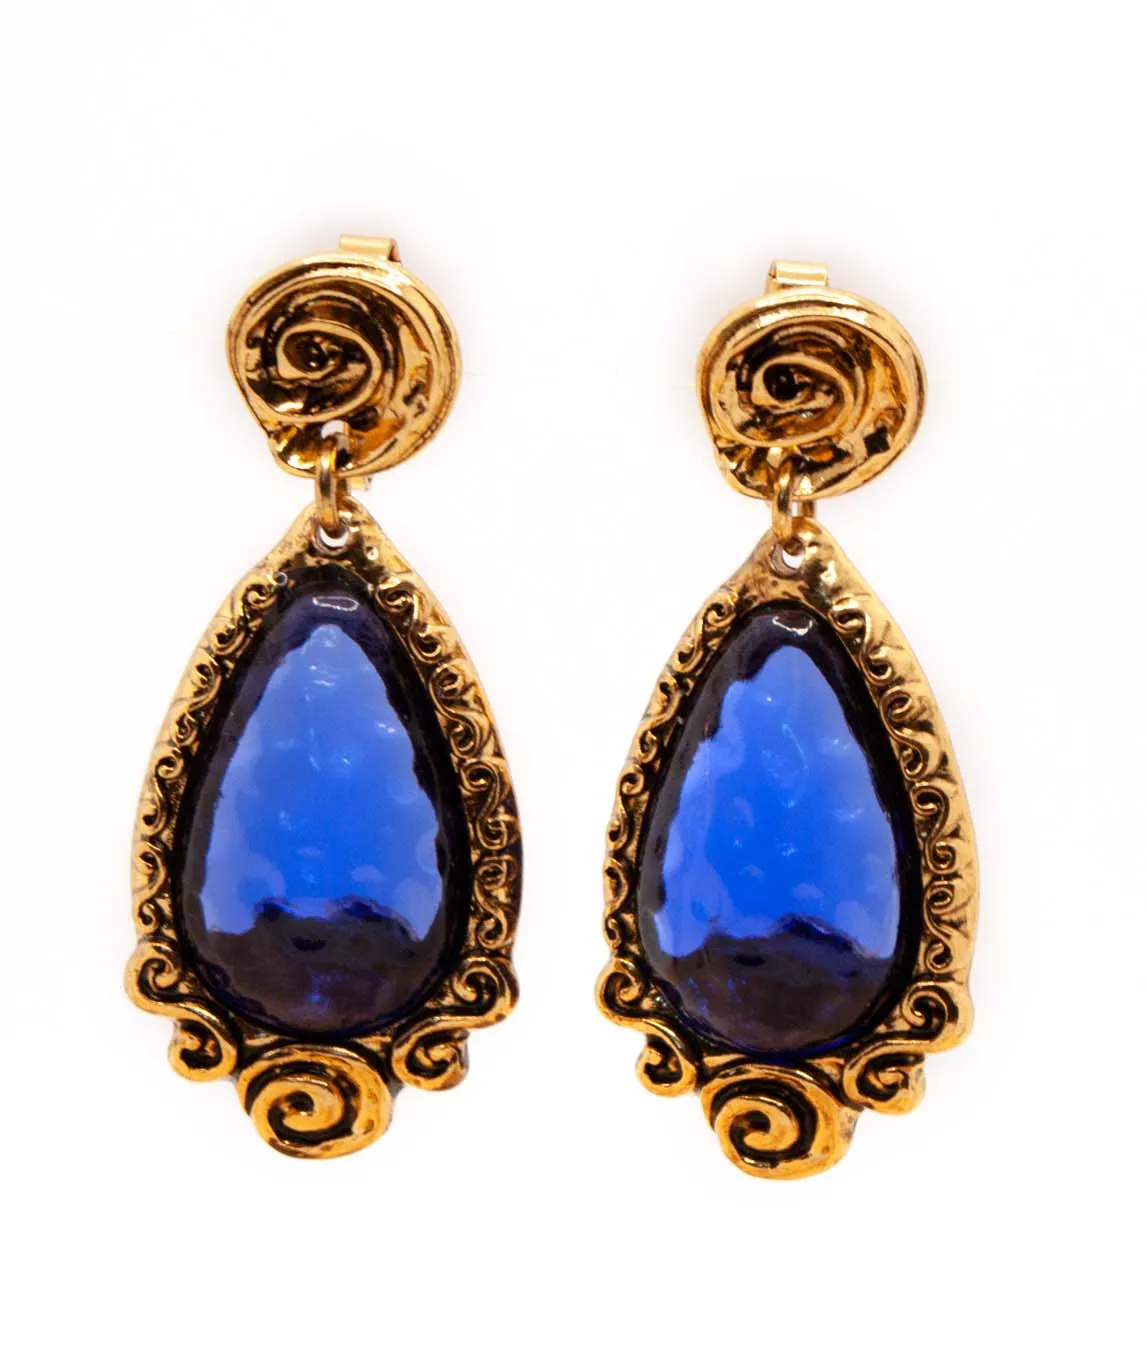 Vintage Christian Lacroix earrings with blue dimpled glass and gold plated metal